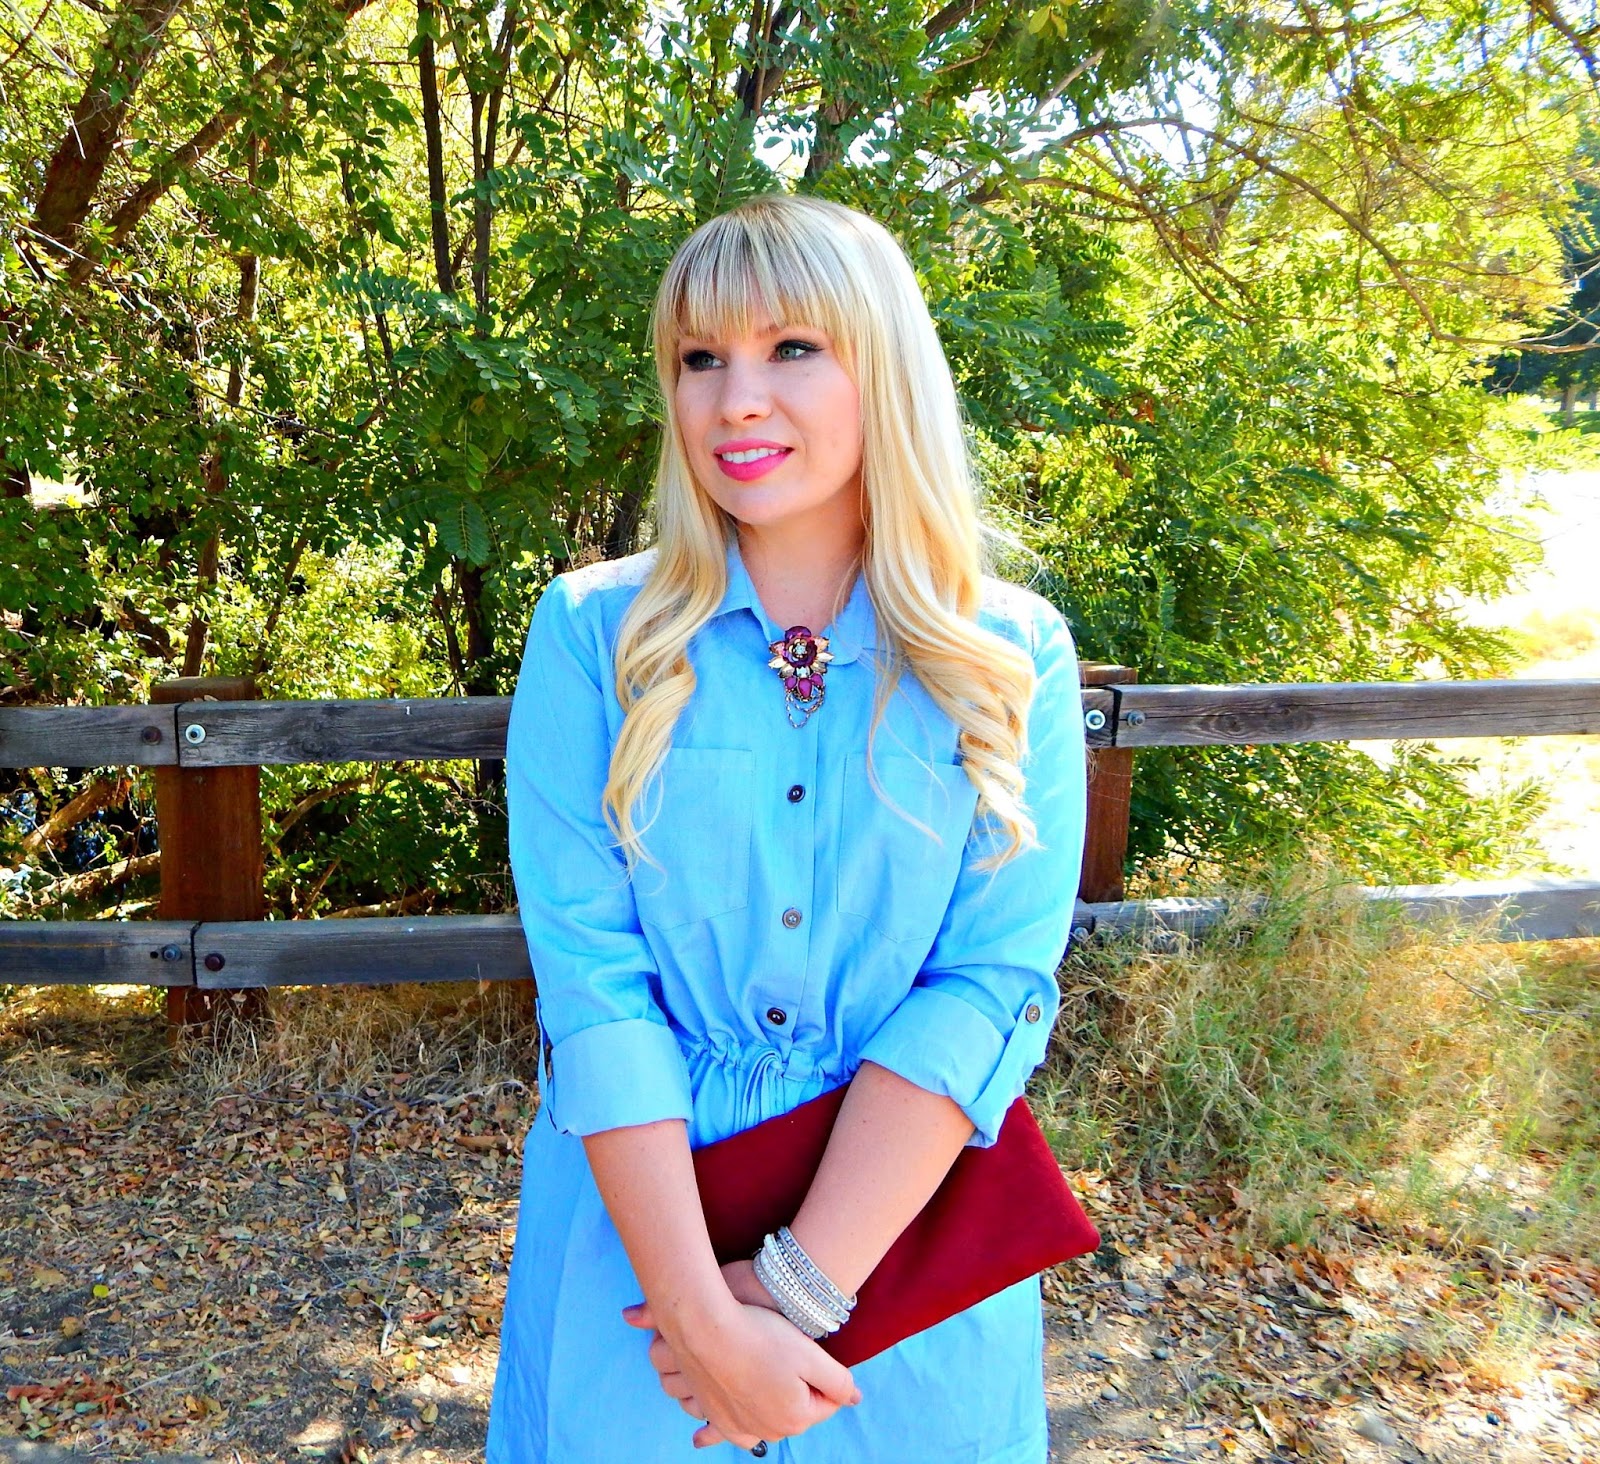 How to Style a Chambray Dress for Fall